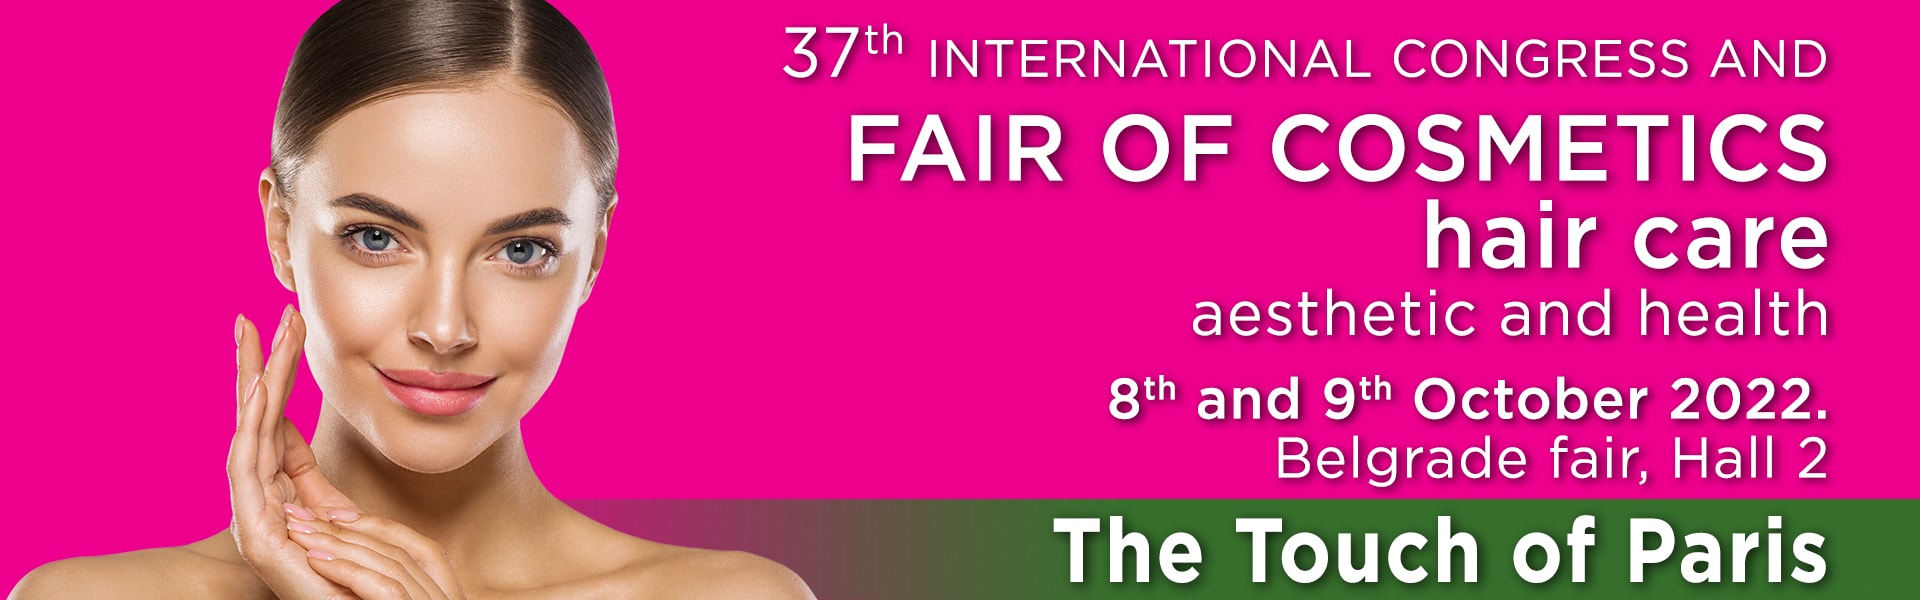 The 37th Cosmetics Fair in Belgrade is scheduled for October 2022